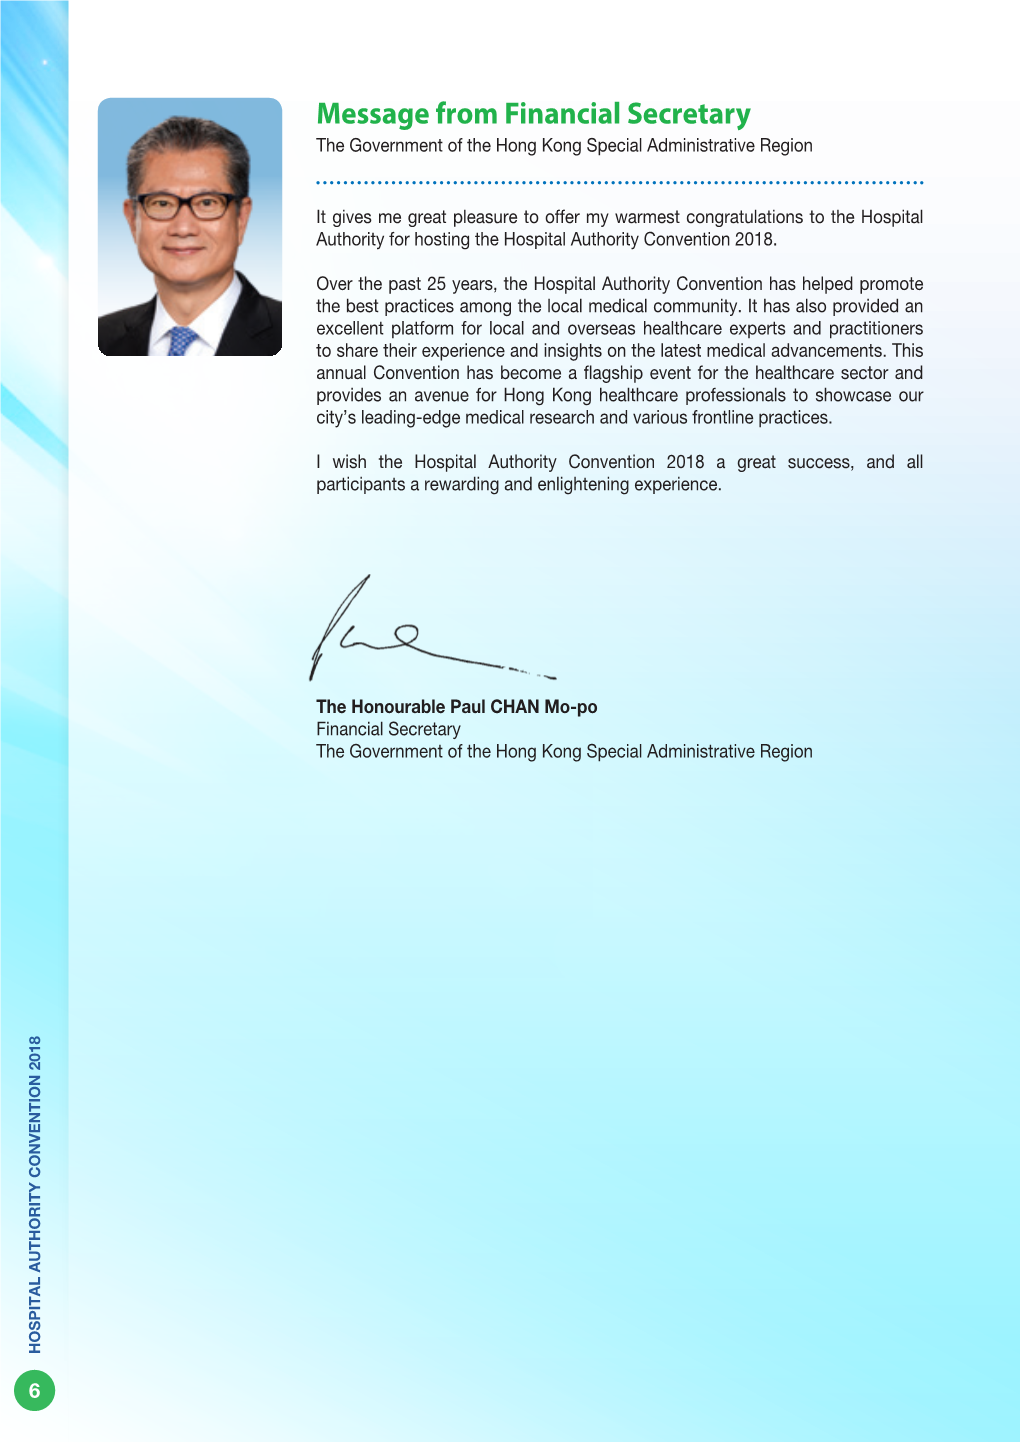 Message from Financial Secretary the Government of the Hong Kong Special Administrative Region